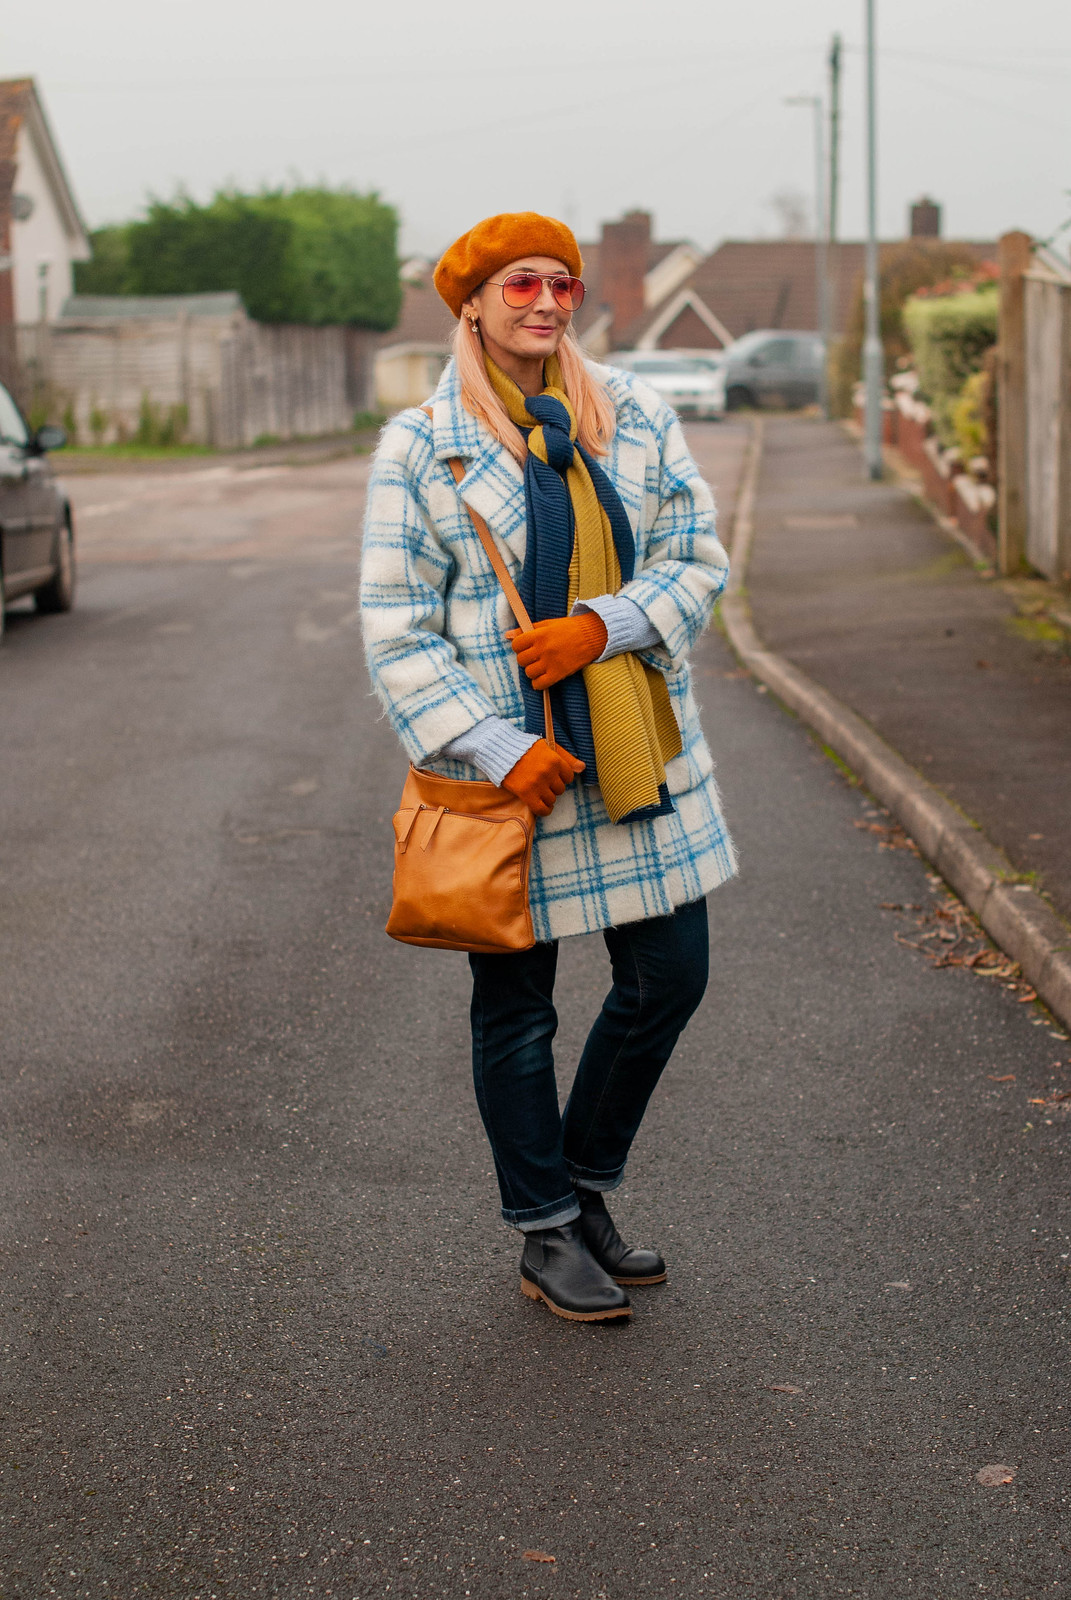 Hot Mess - Or More Coordinated Than I Thought? (Catherine Summers AKA Not Dressed As Lamb wearing blue/white checked cocoon coat, dark straight leg jeans, navy Chelsea boots, navy/green woollen scarf, pumpkin orange beret and gloves, tan cross-body bag)